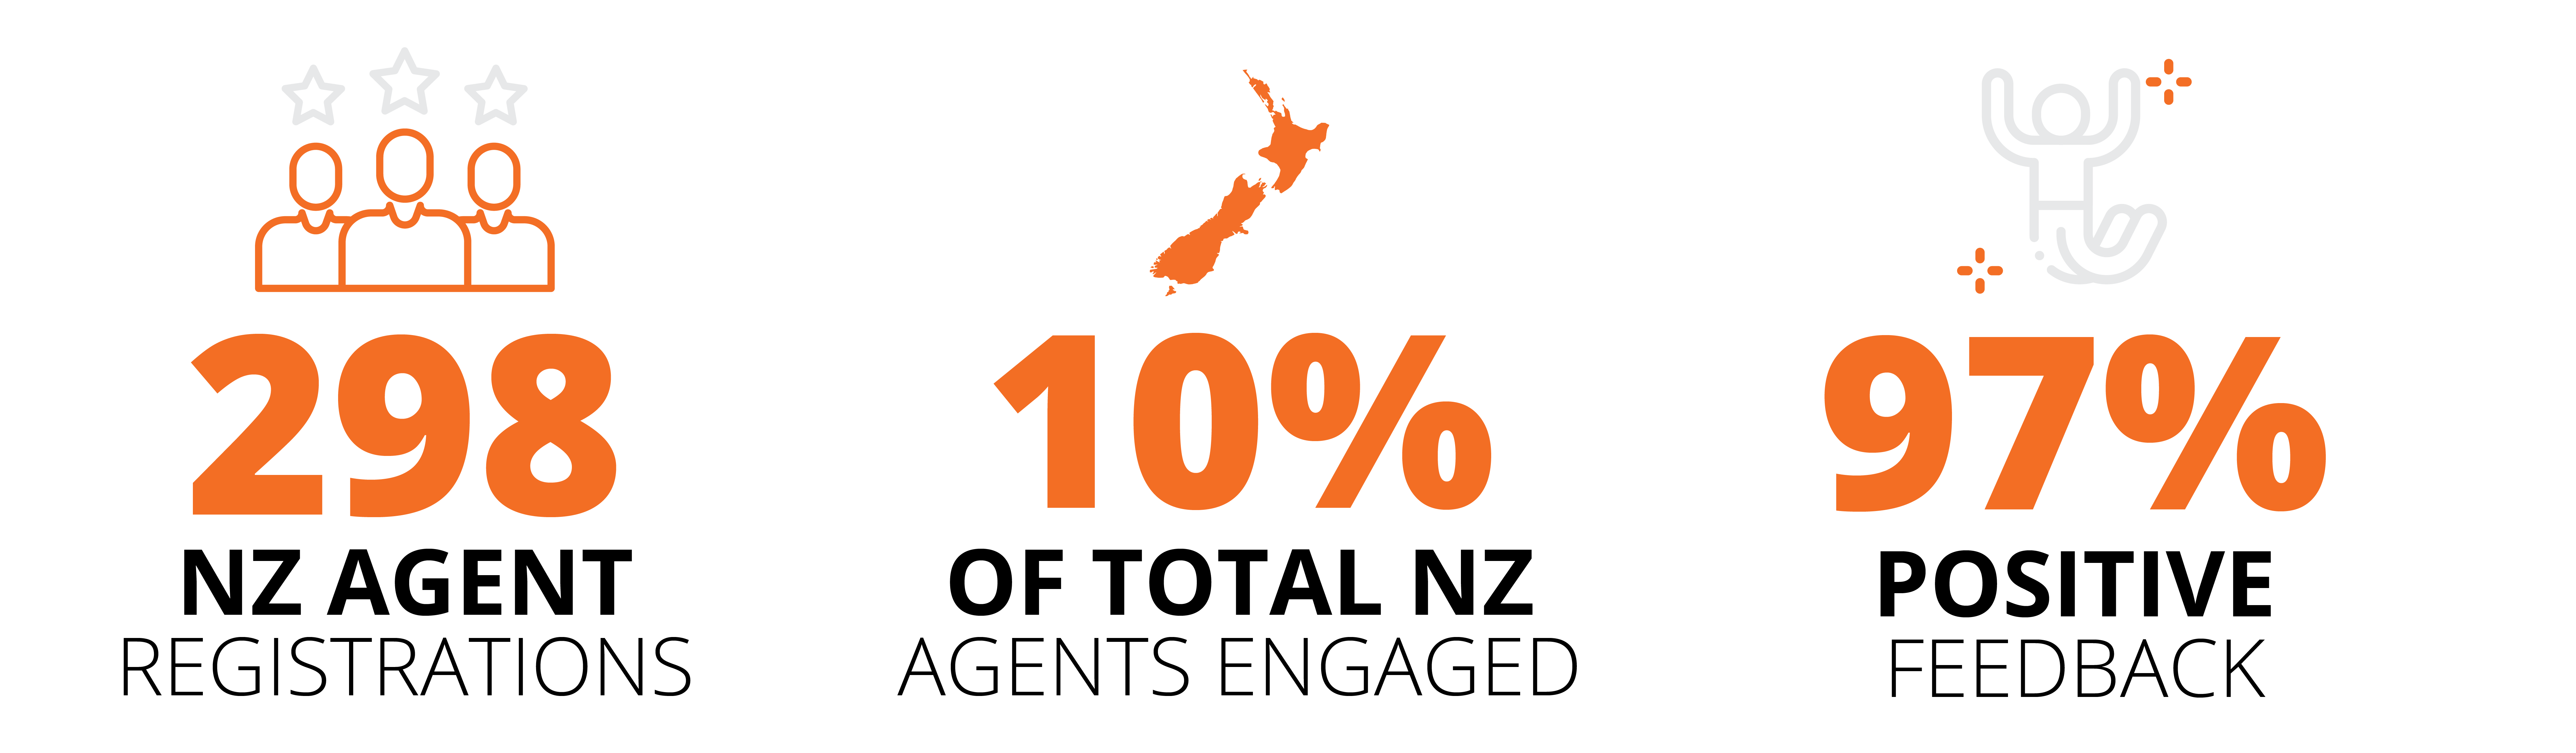 Approximately 10% of the New Zealand travel agent community was engaged during this training event.